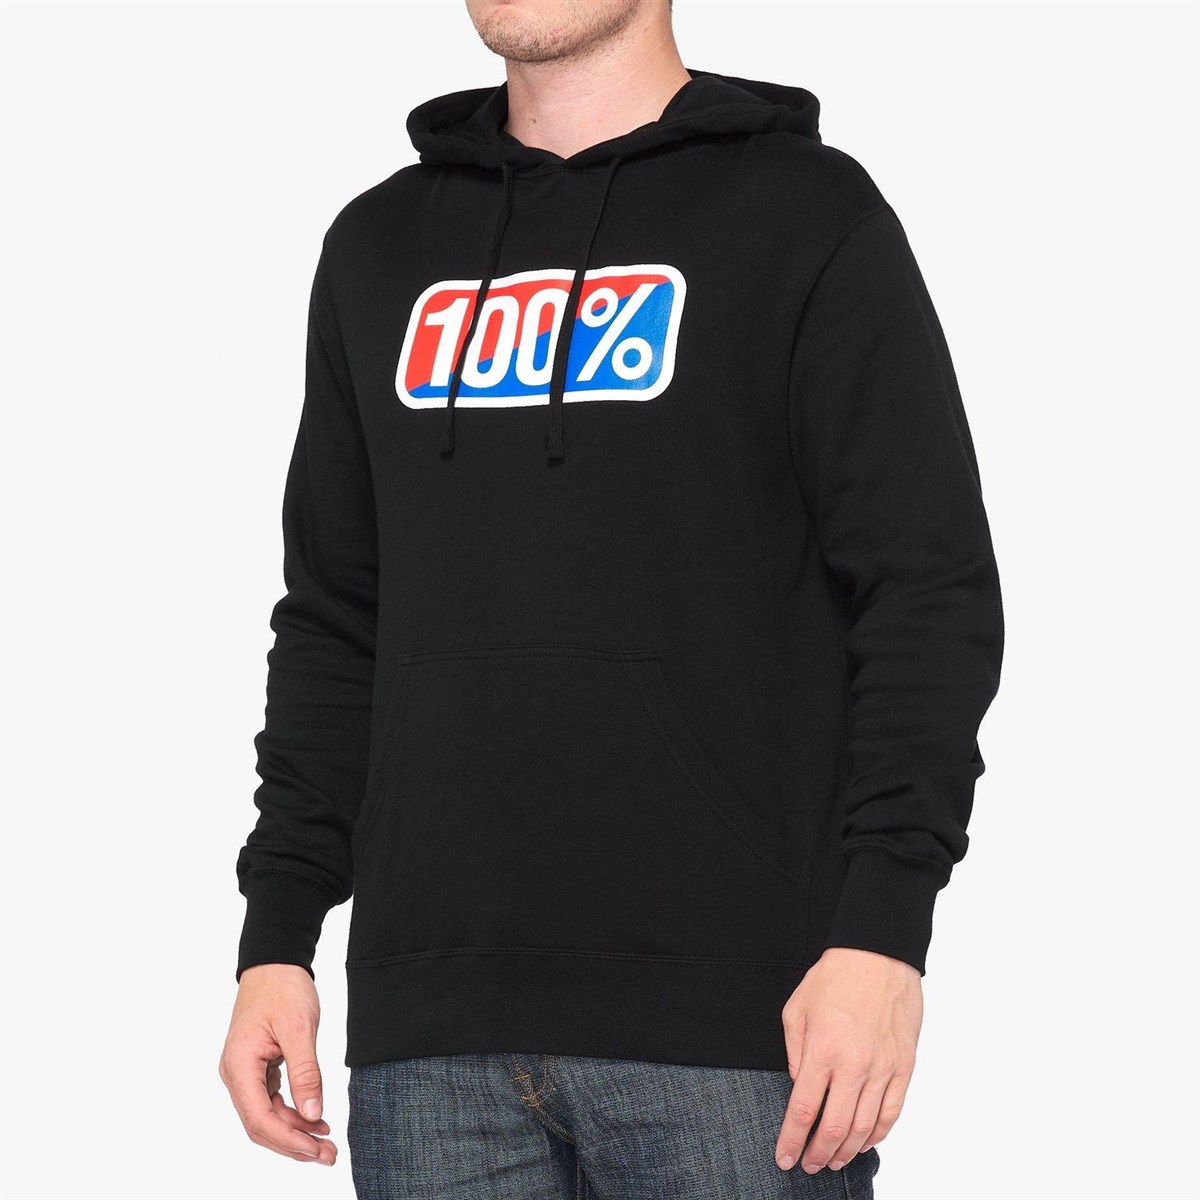 100% Classic Hooded Pullover Sweatshirt product image